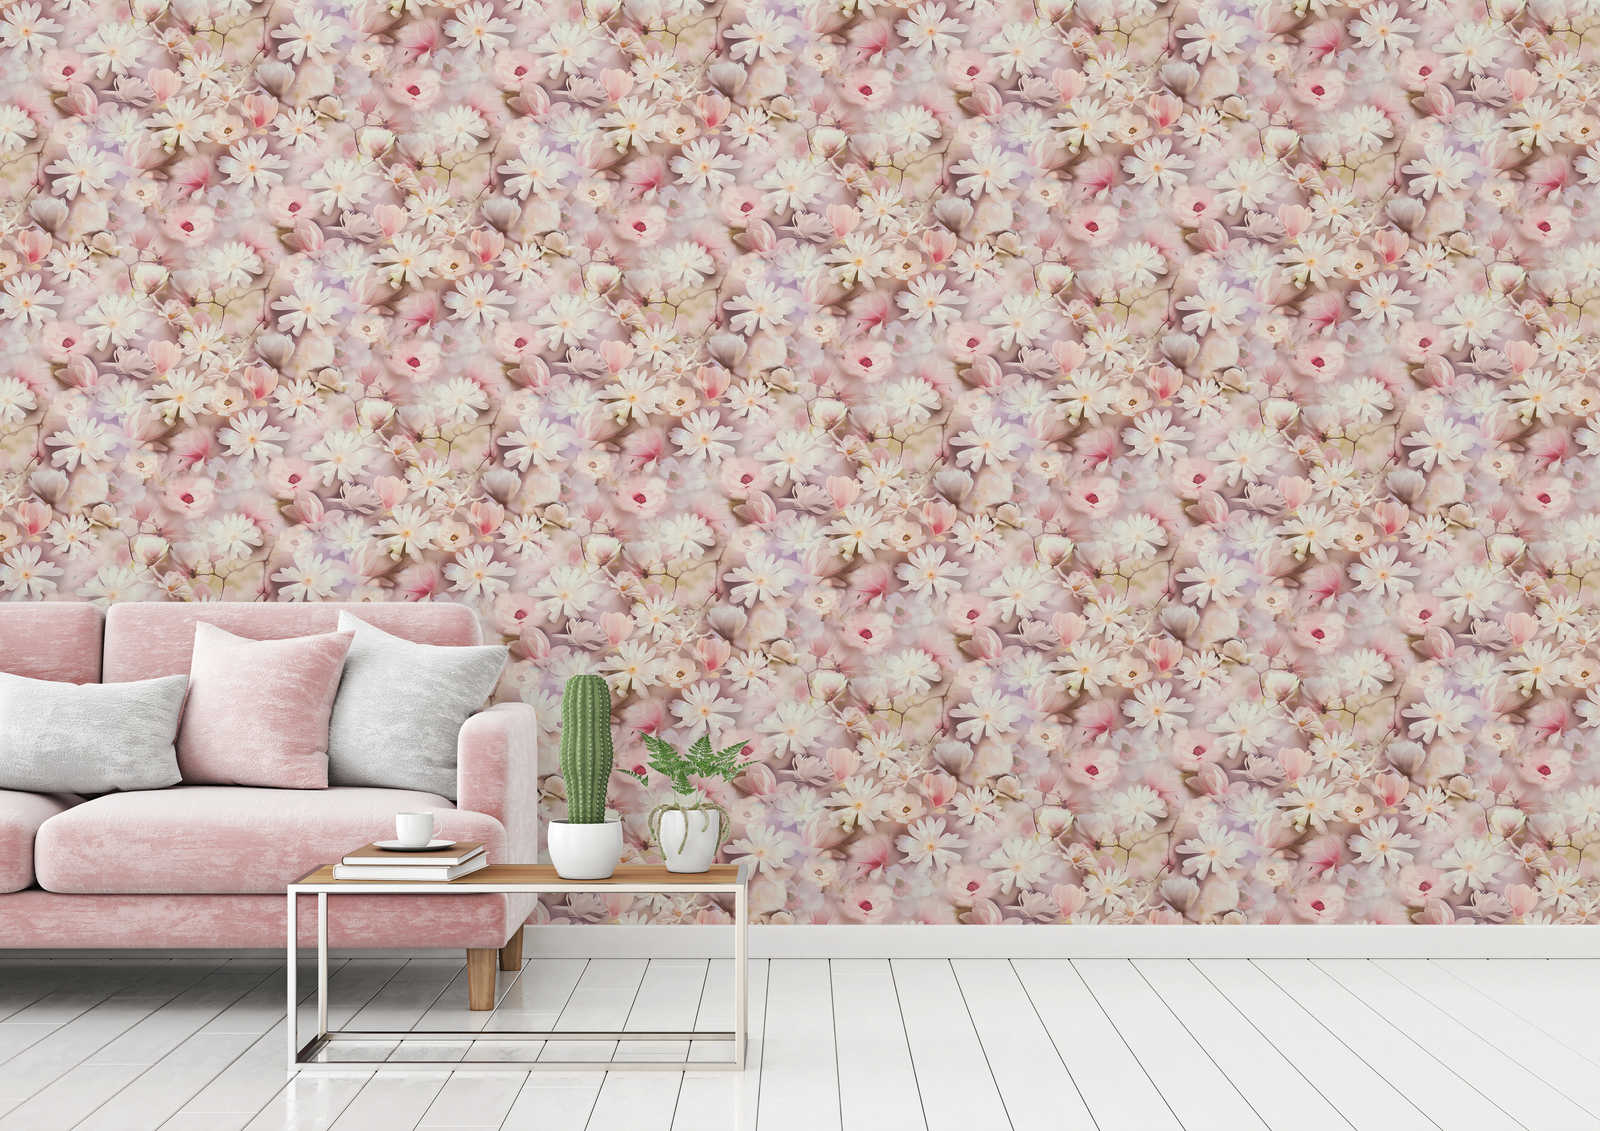             Floral wallpaper collage design in pink and white
        